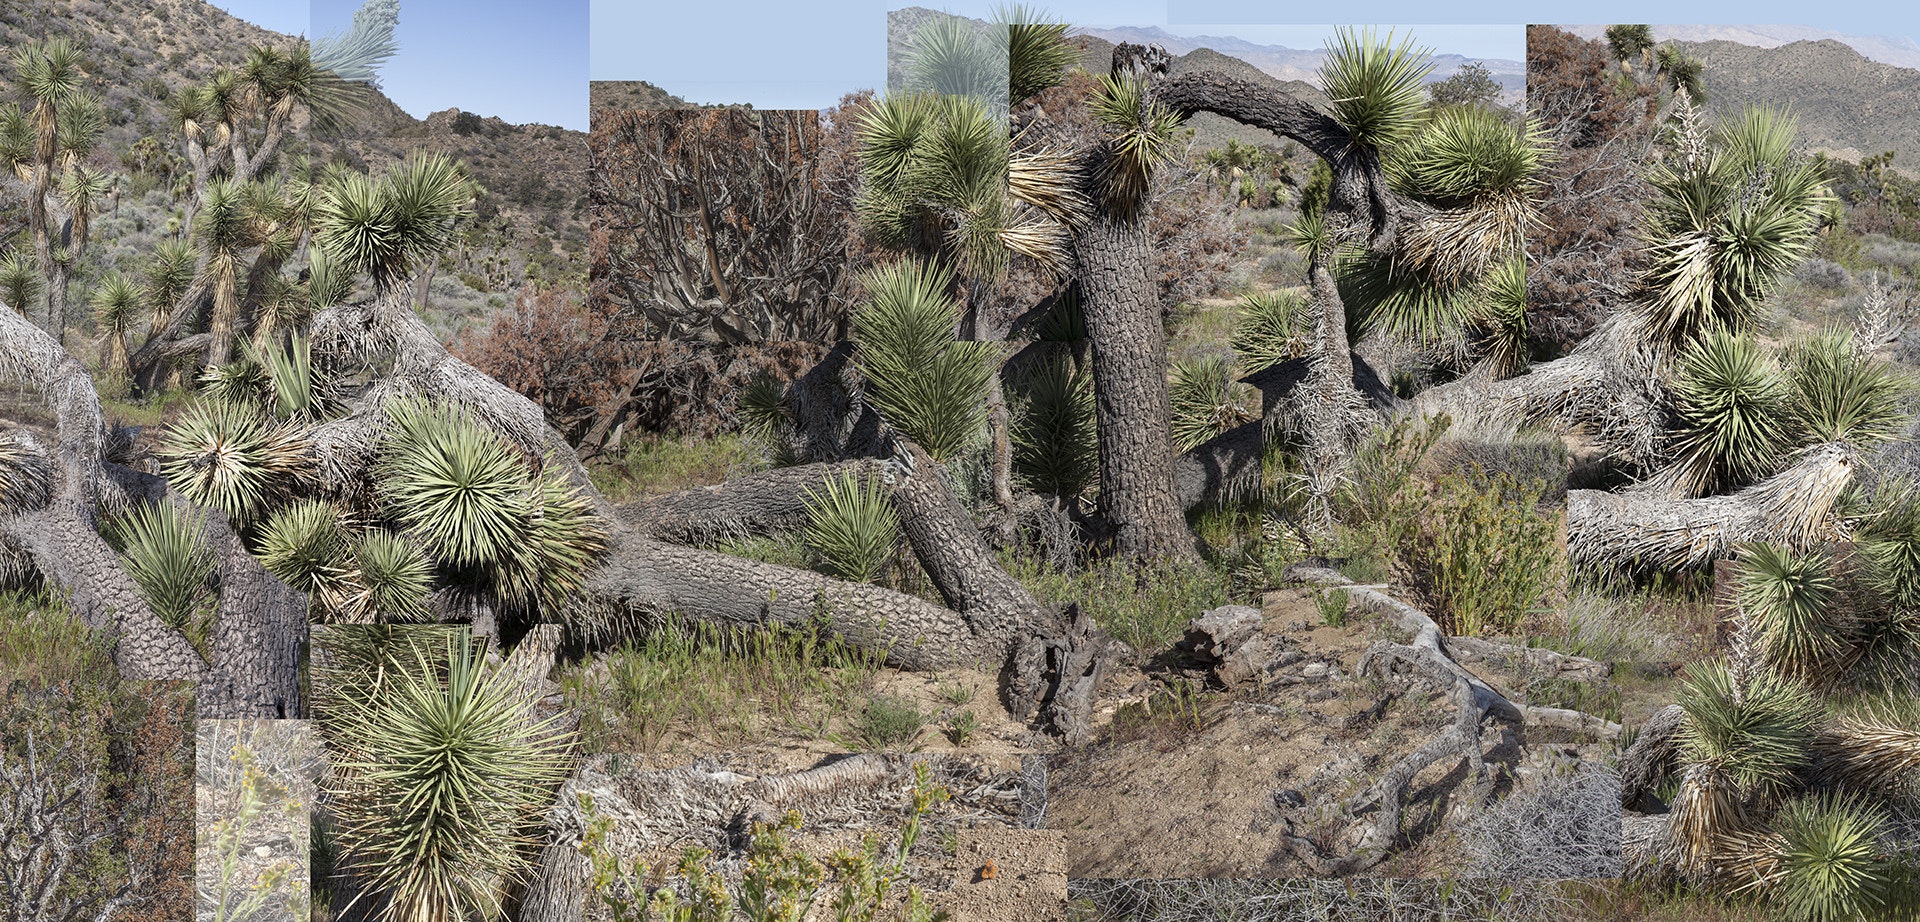 A collage of color photographs depicting joshua trees.